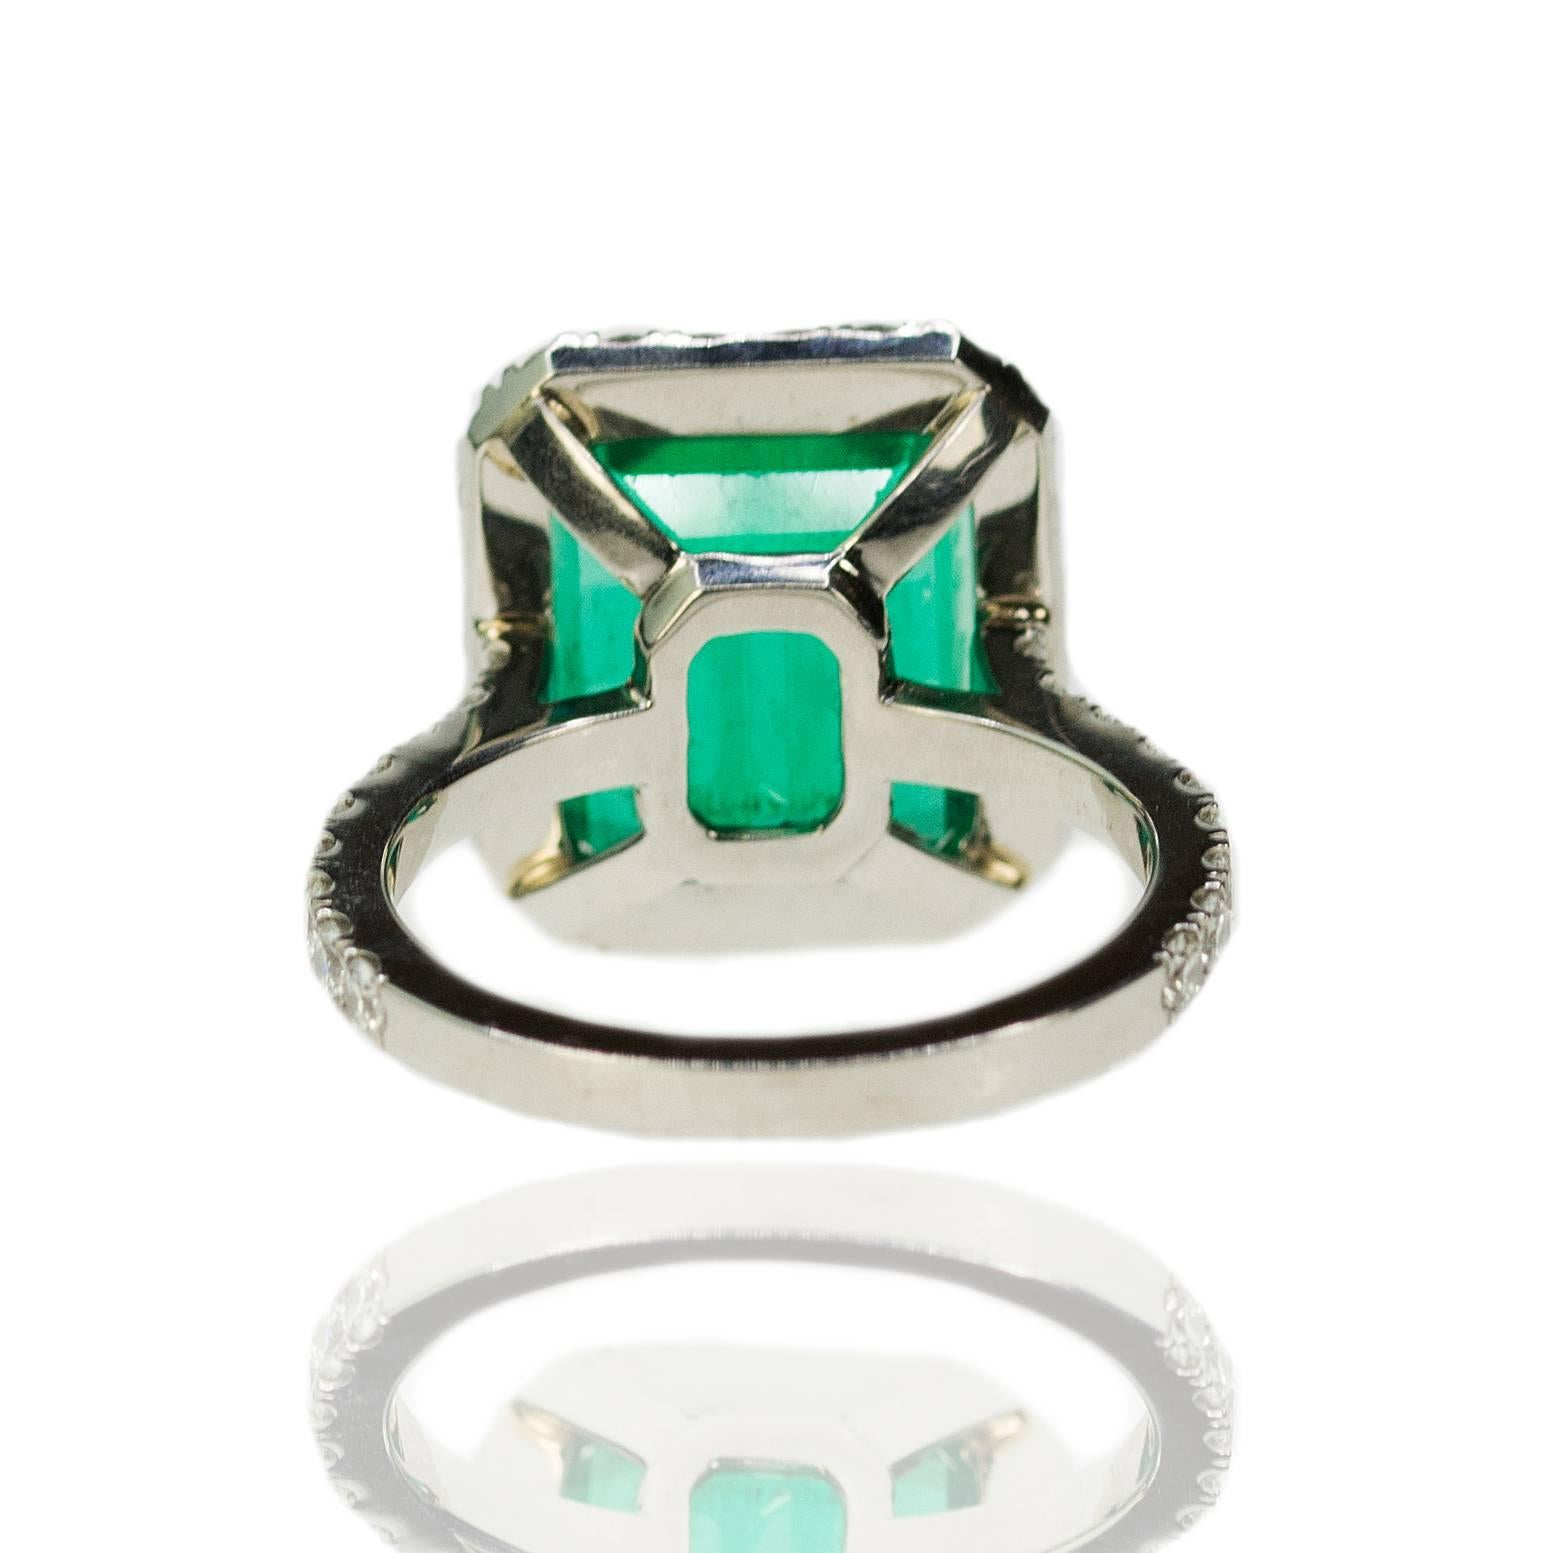 Ring with 6.64 carat AGL certified "Minor" Colombian Emerald set in 18k mounting with 1.40 carats of round brilliant diamonds. 8.27g